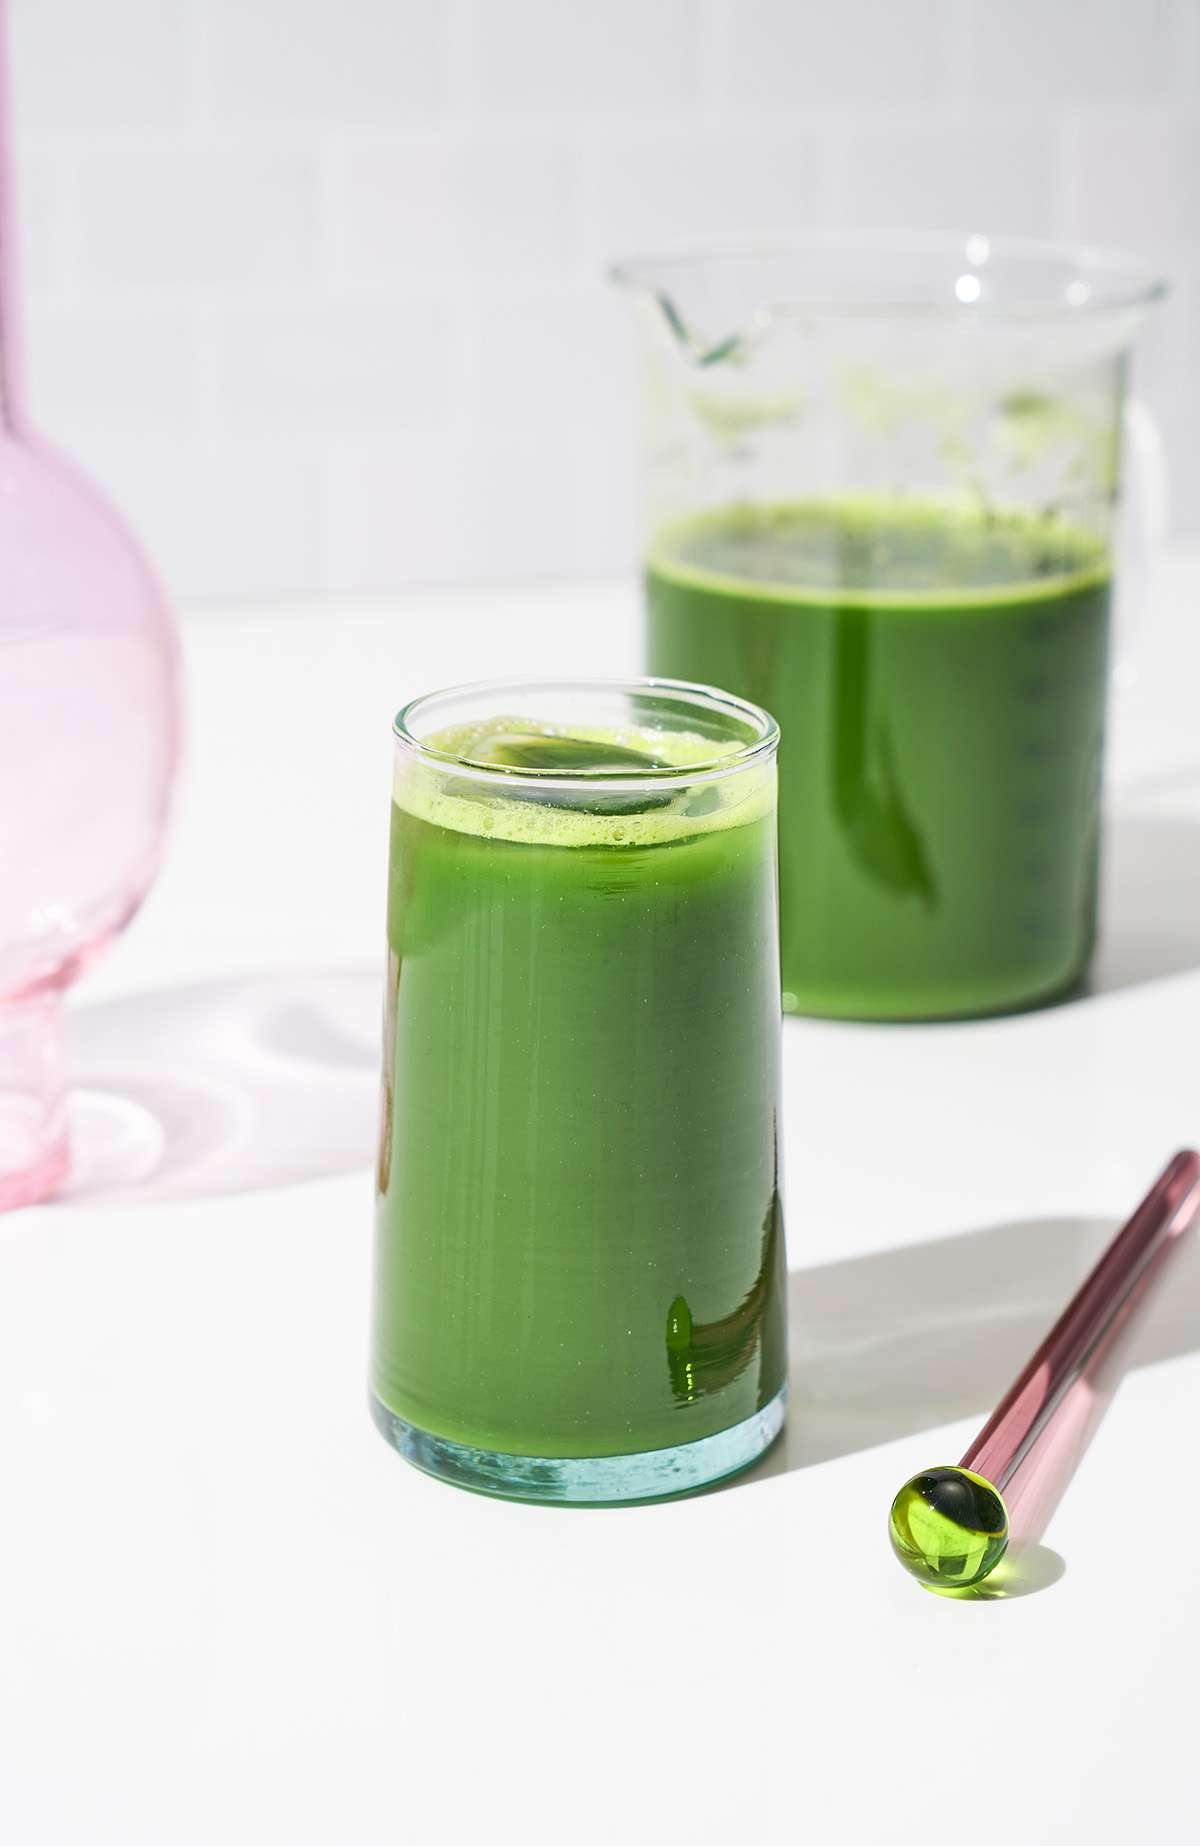 Green juice in a glass with a pitcher of juice in background.